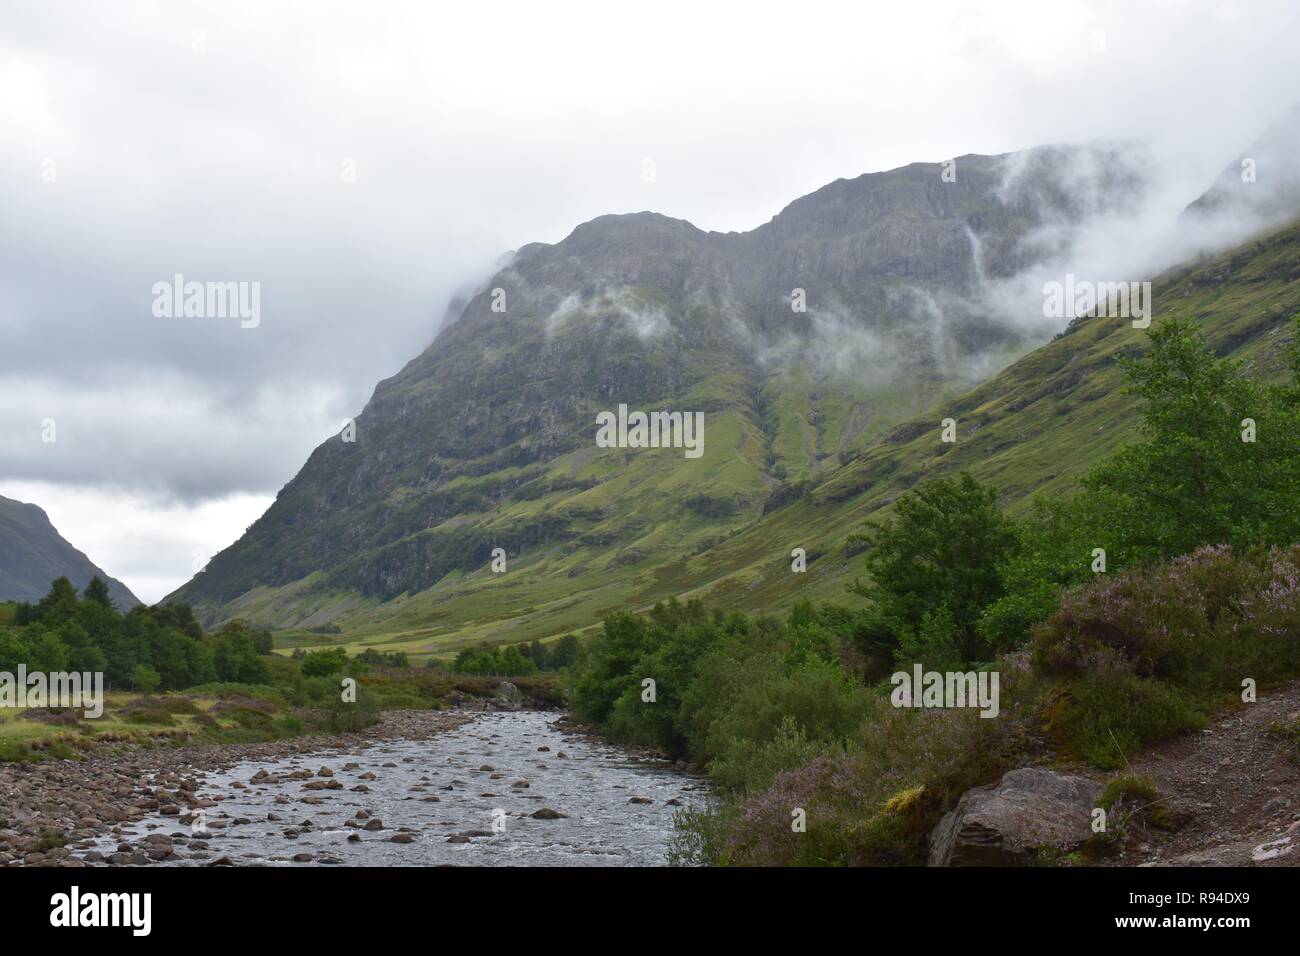 The River Coe Flowing Through The Valley of The Glencoe Mountain Range in The Scottish Highlands. Taken on a Raining and Overcast August Day. Stock Photo